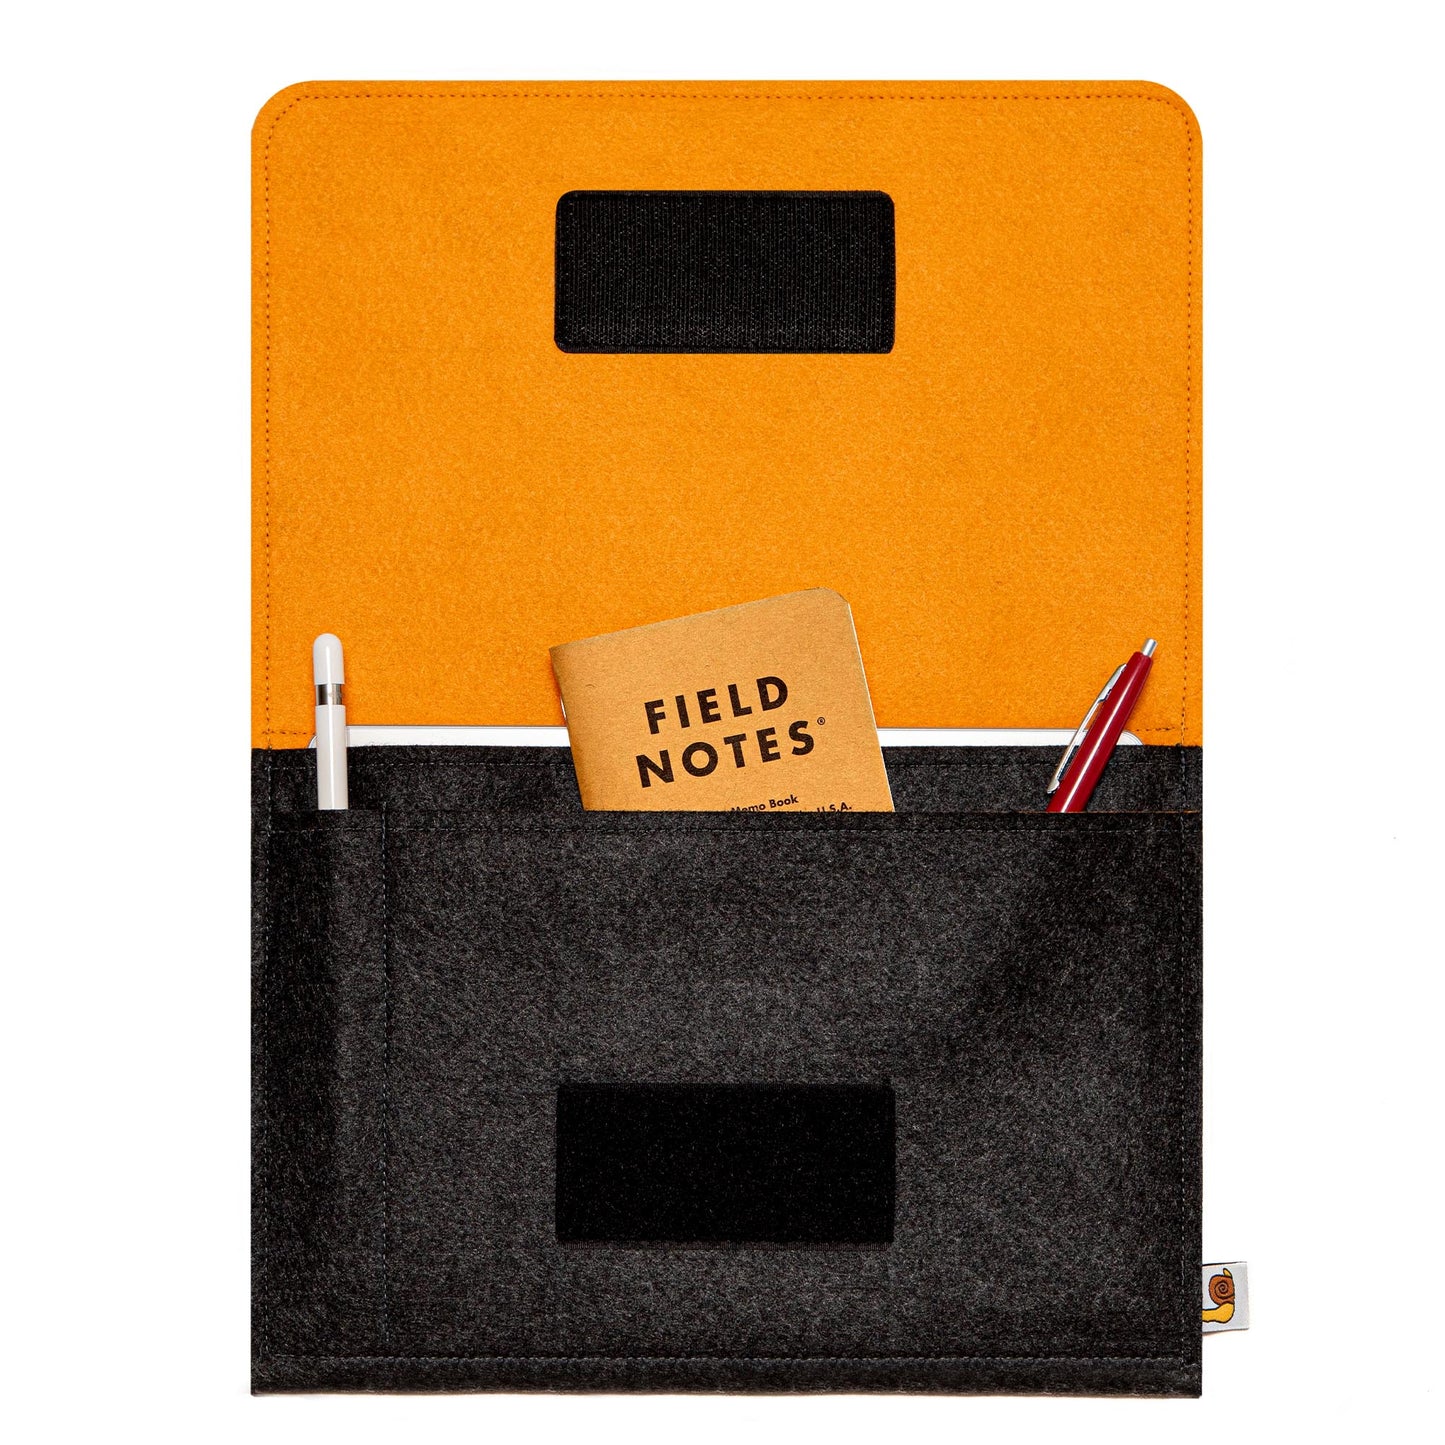 Premium Felt iPad Cover: Ultimate Protection with Accessories Pocket - Charcoal & Light Orange